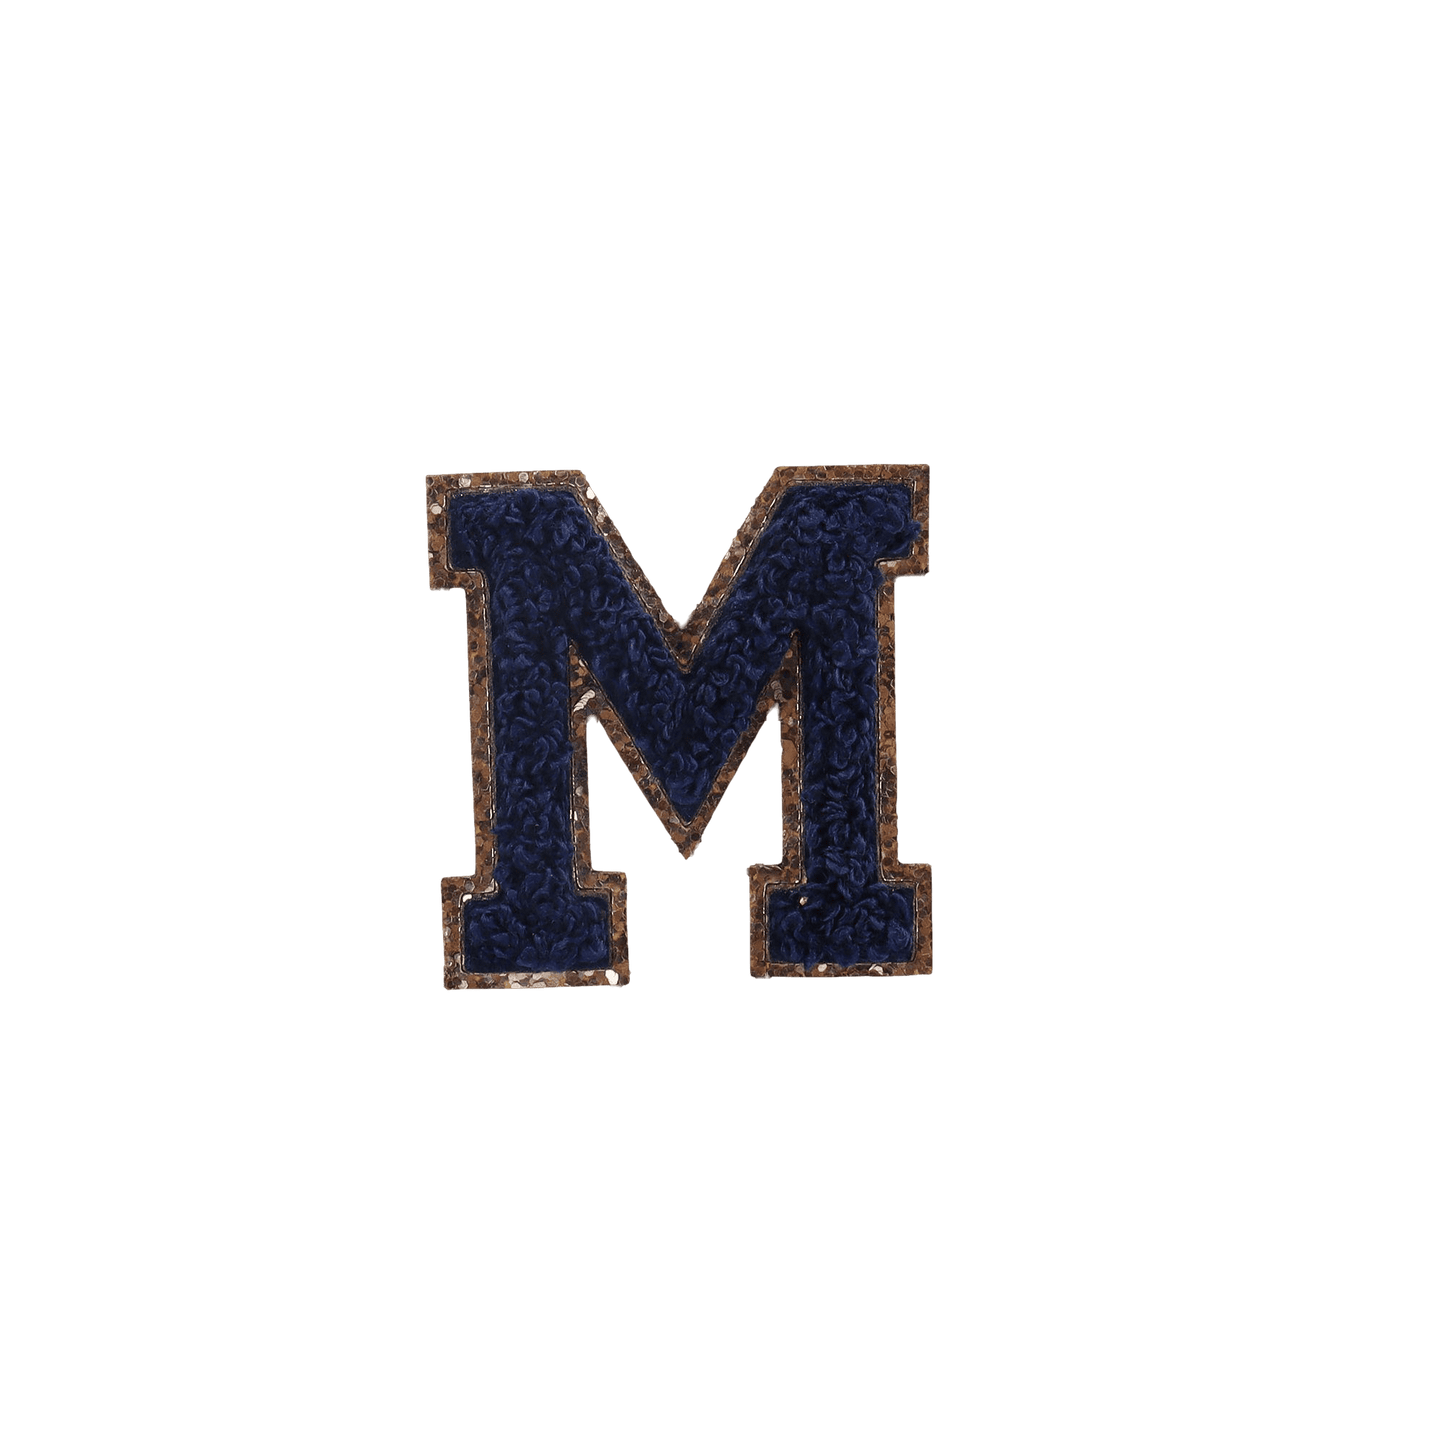 M Letter Patches